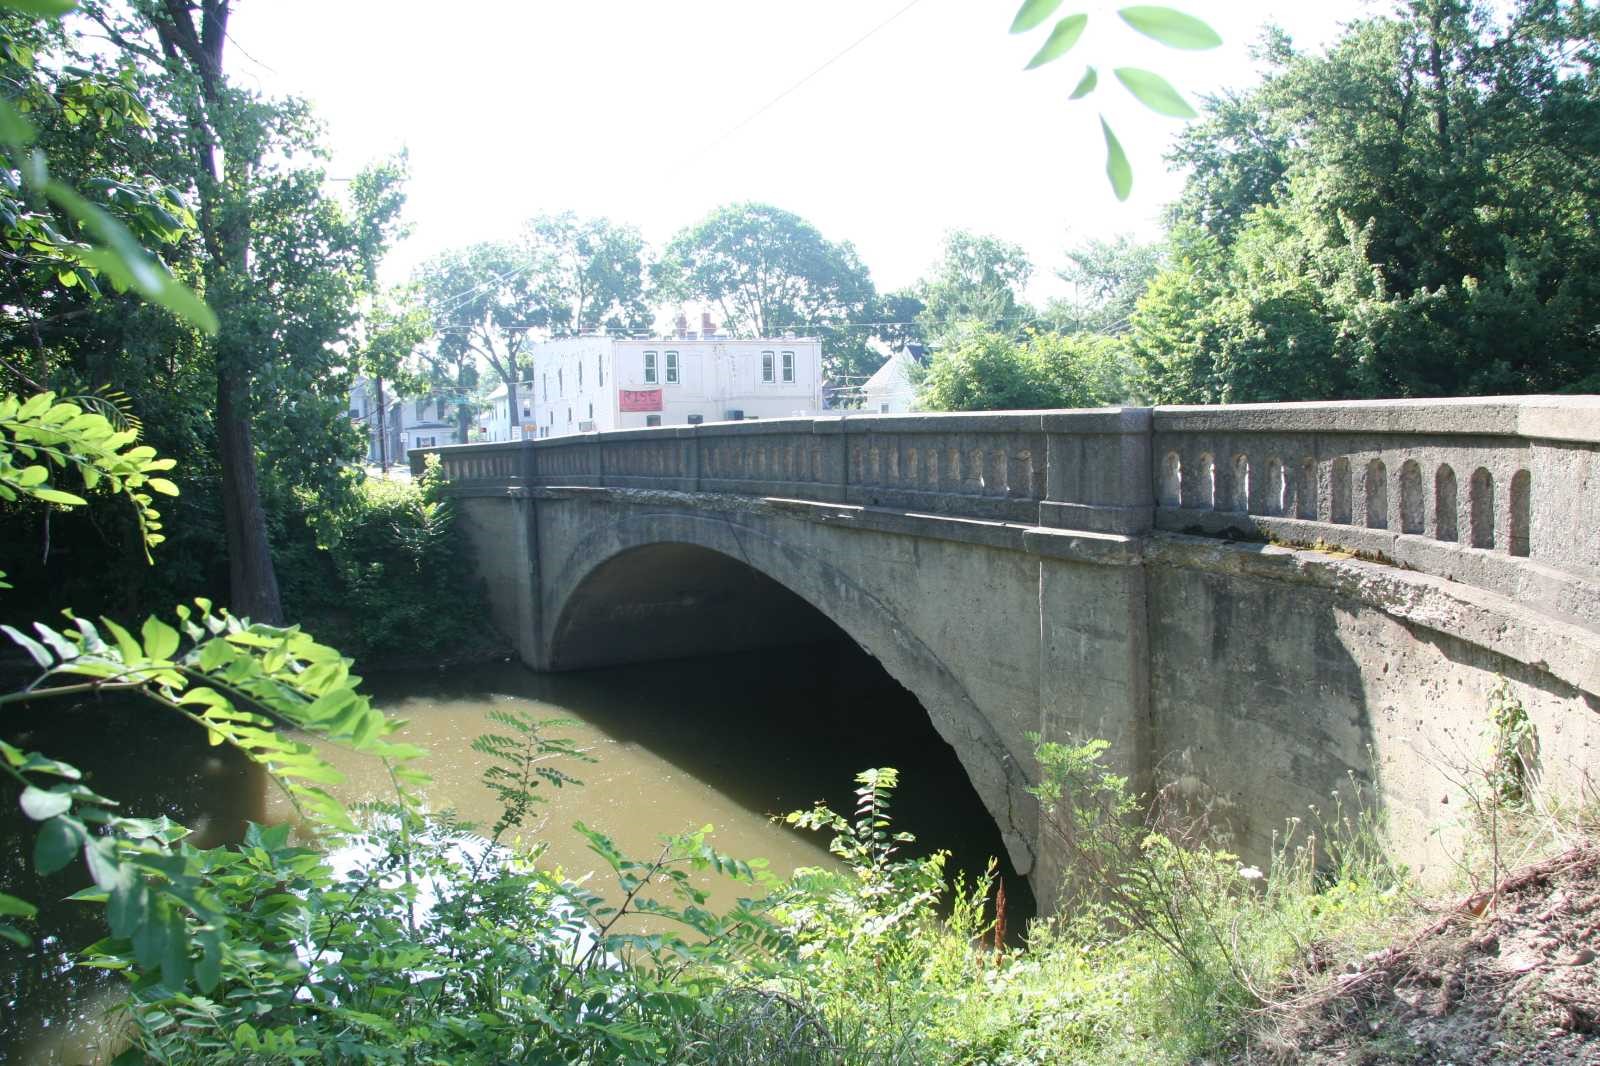 A bridge spanning over a riverway.